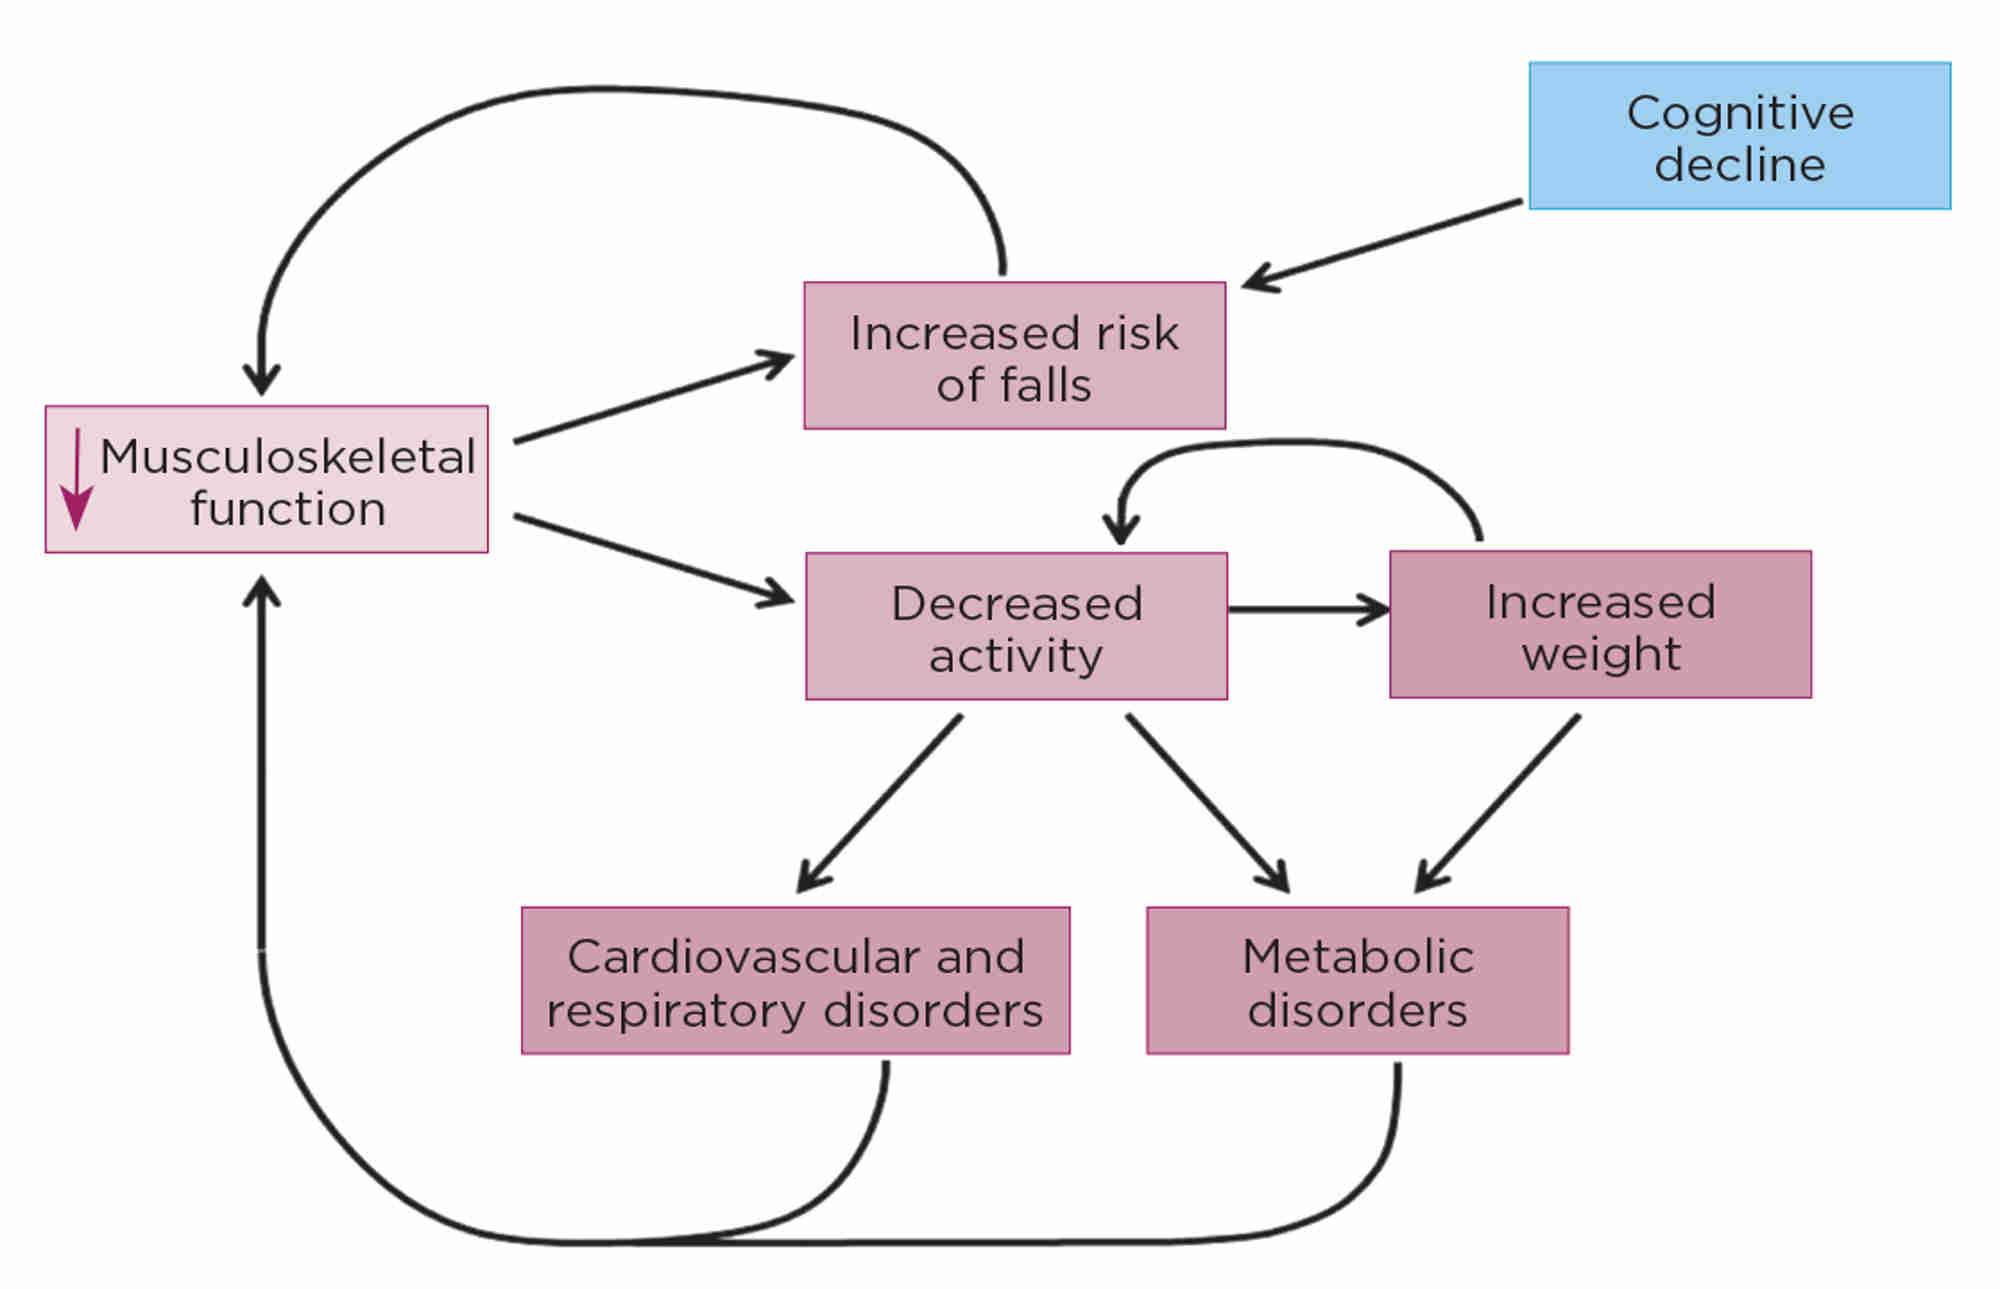 Figure 2. Placing musculoskeletal decline at the centre of age-related health decline. The decrease in musculoskeletal function can lead to increasing falls and decreasing activity, which feedback directly and indirectly, causing further declines. These effects are known to influence other age-related conditions and co-morbidities.